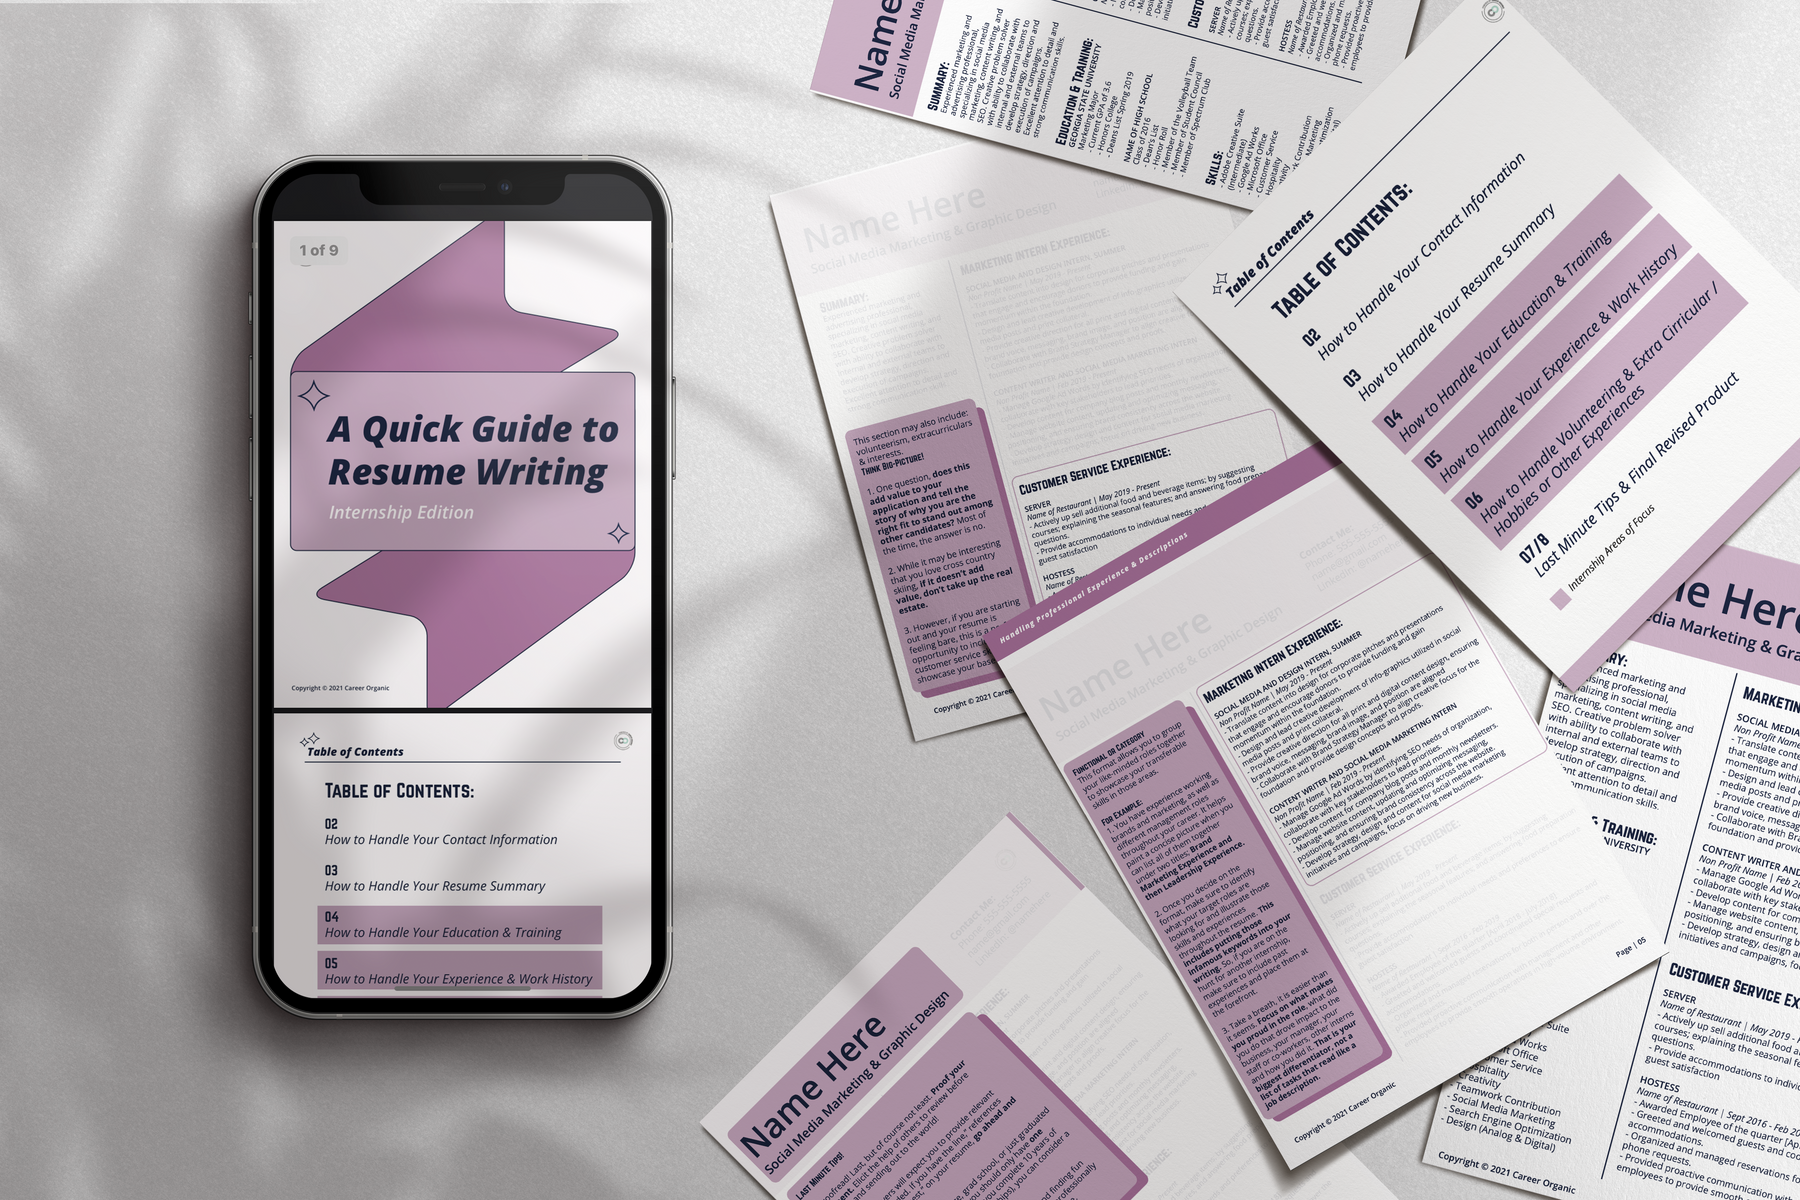 an iphone with 6 pages behind it, all displaying a free resource called a quick guide to resume writing, internship edition